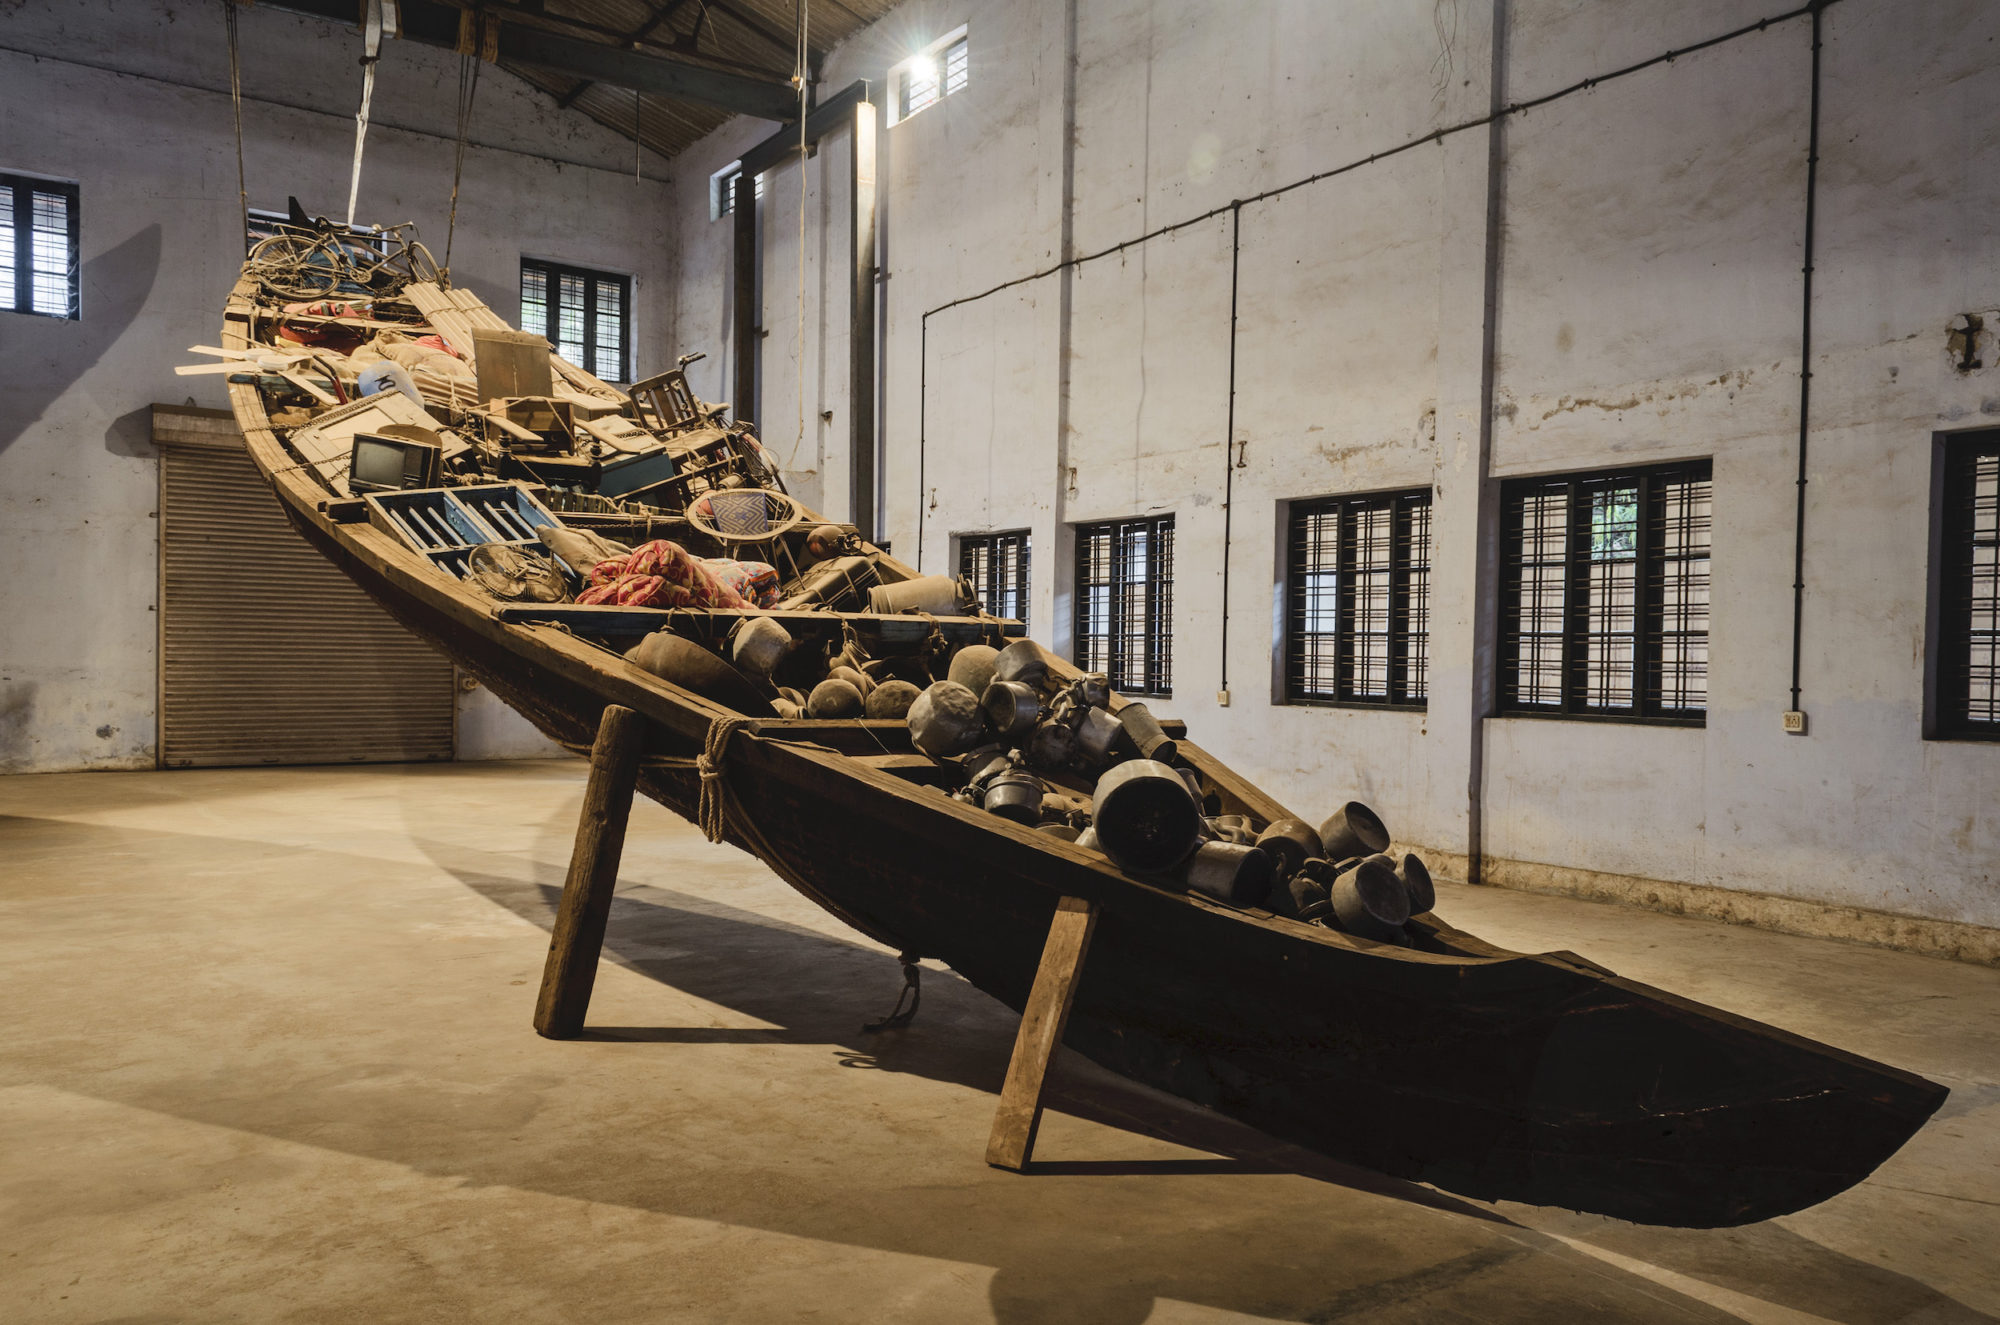 Subodh Gupta, ''Untitled,'' 2012 Boat, wood and found objects. Dimensions variable. Installation view at Aspinwall House, Fort Kochi.